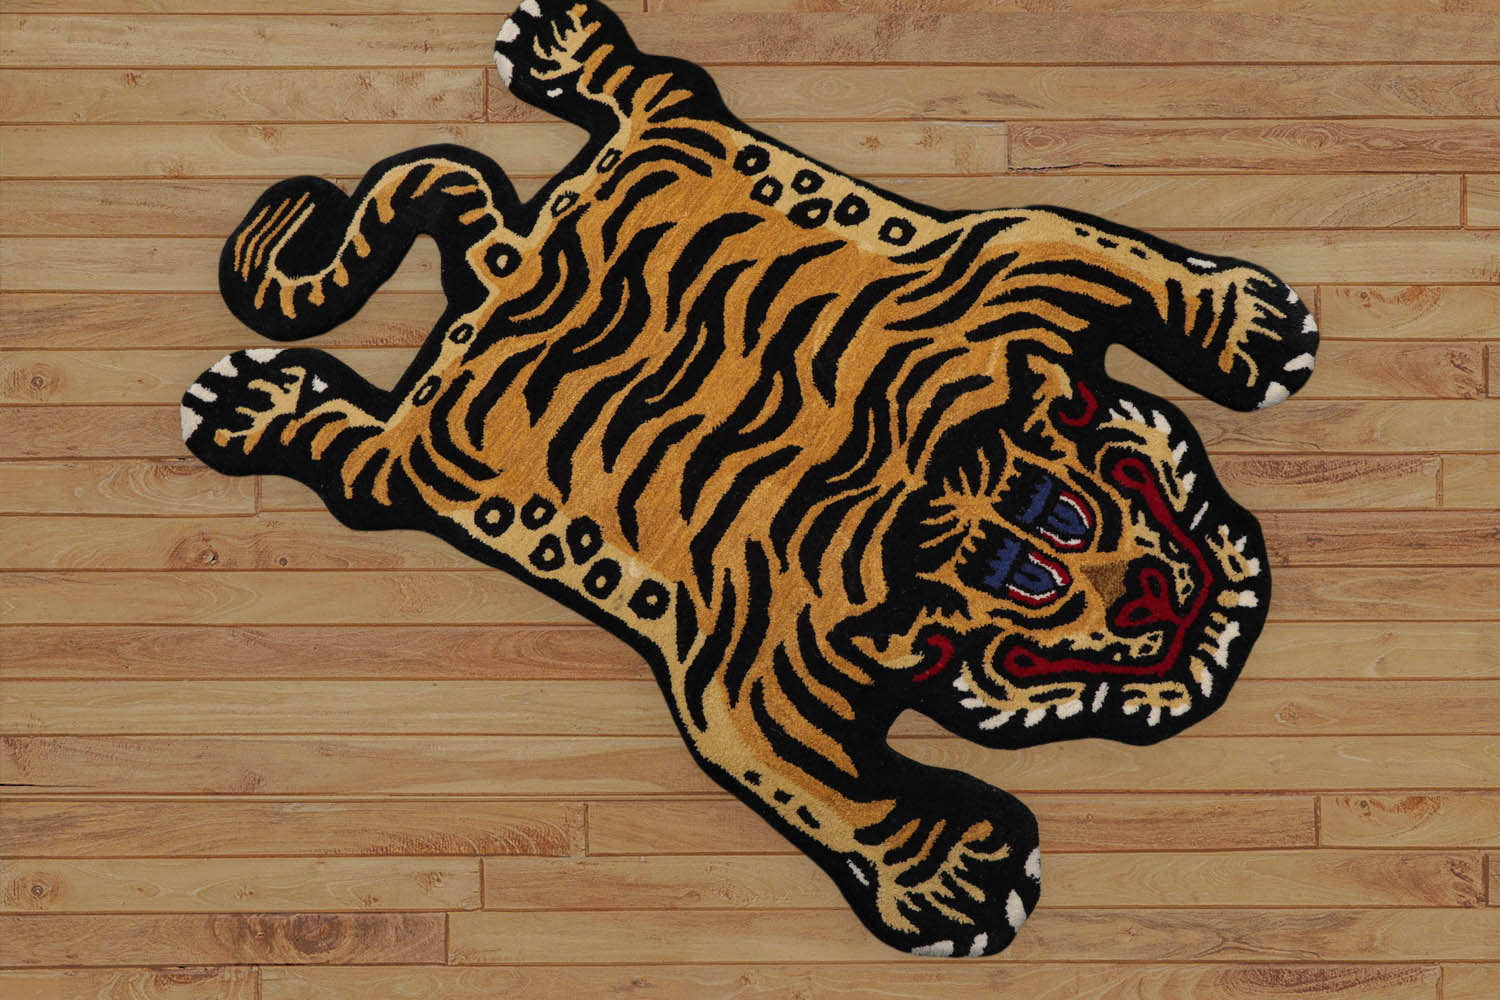 Coulmann 3x5 Hand Tufted Hand Made 100% Wool Tiger Novelty Oriental Area Rug Gold, Black Color